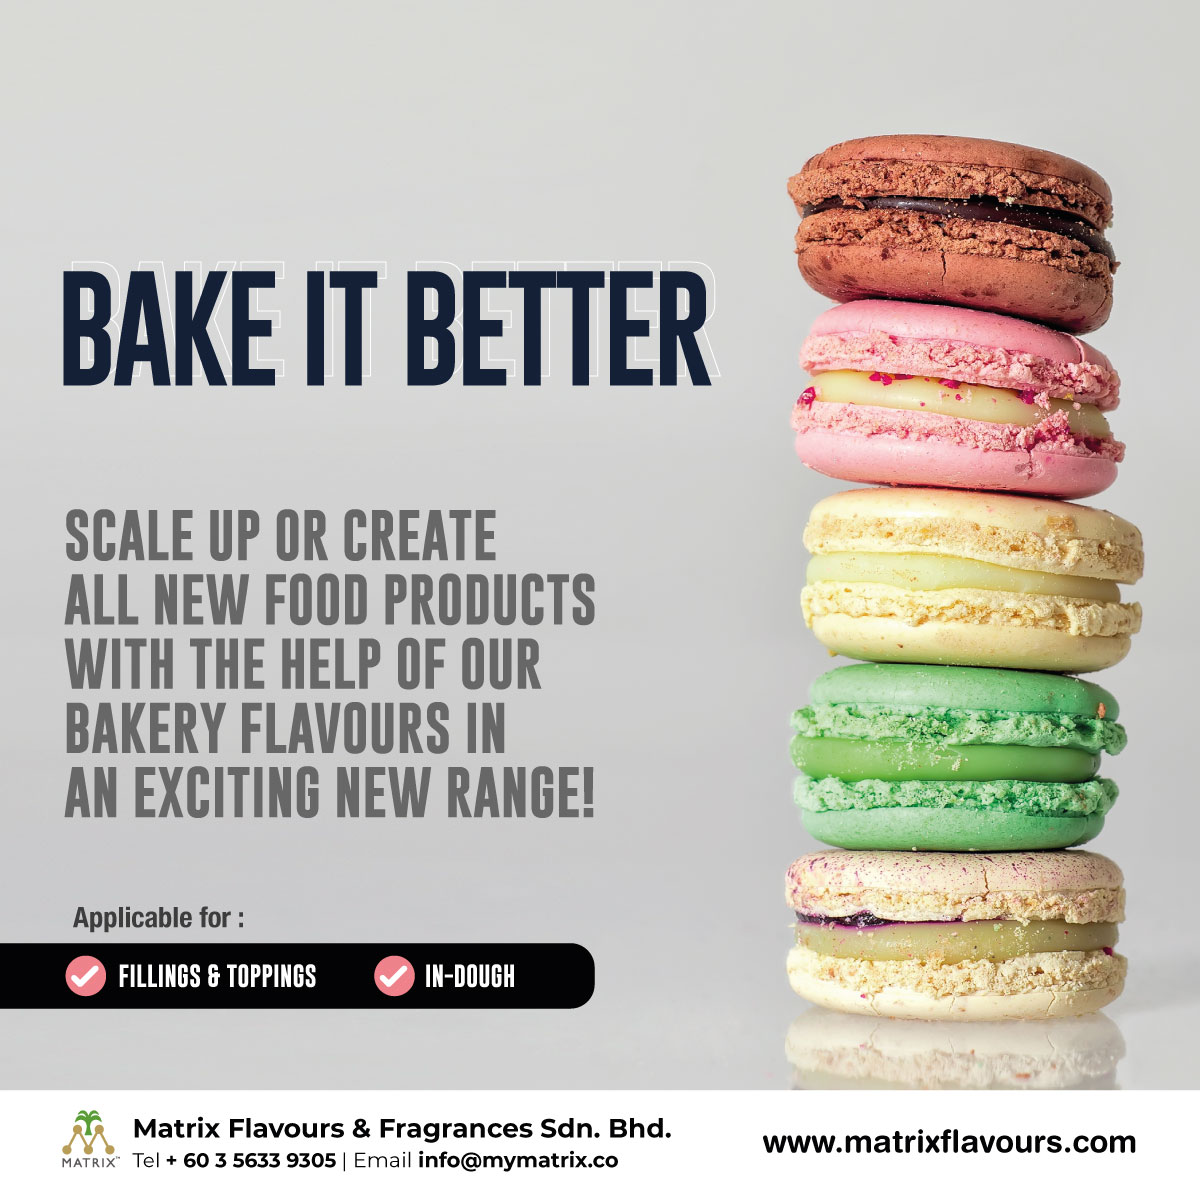 Bake It Better | Sweet Bakery Flavours for Fillings, Toppings and In-dough applications